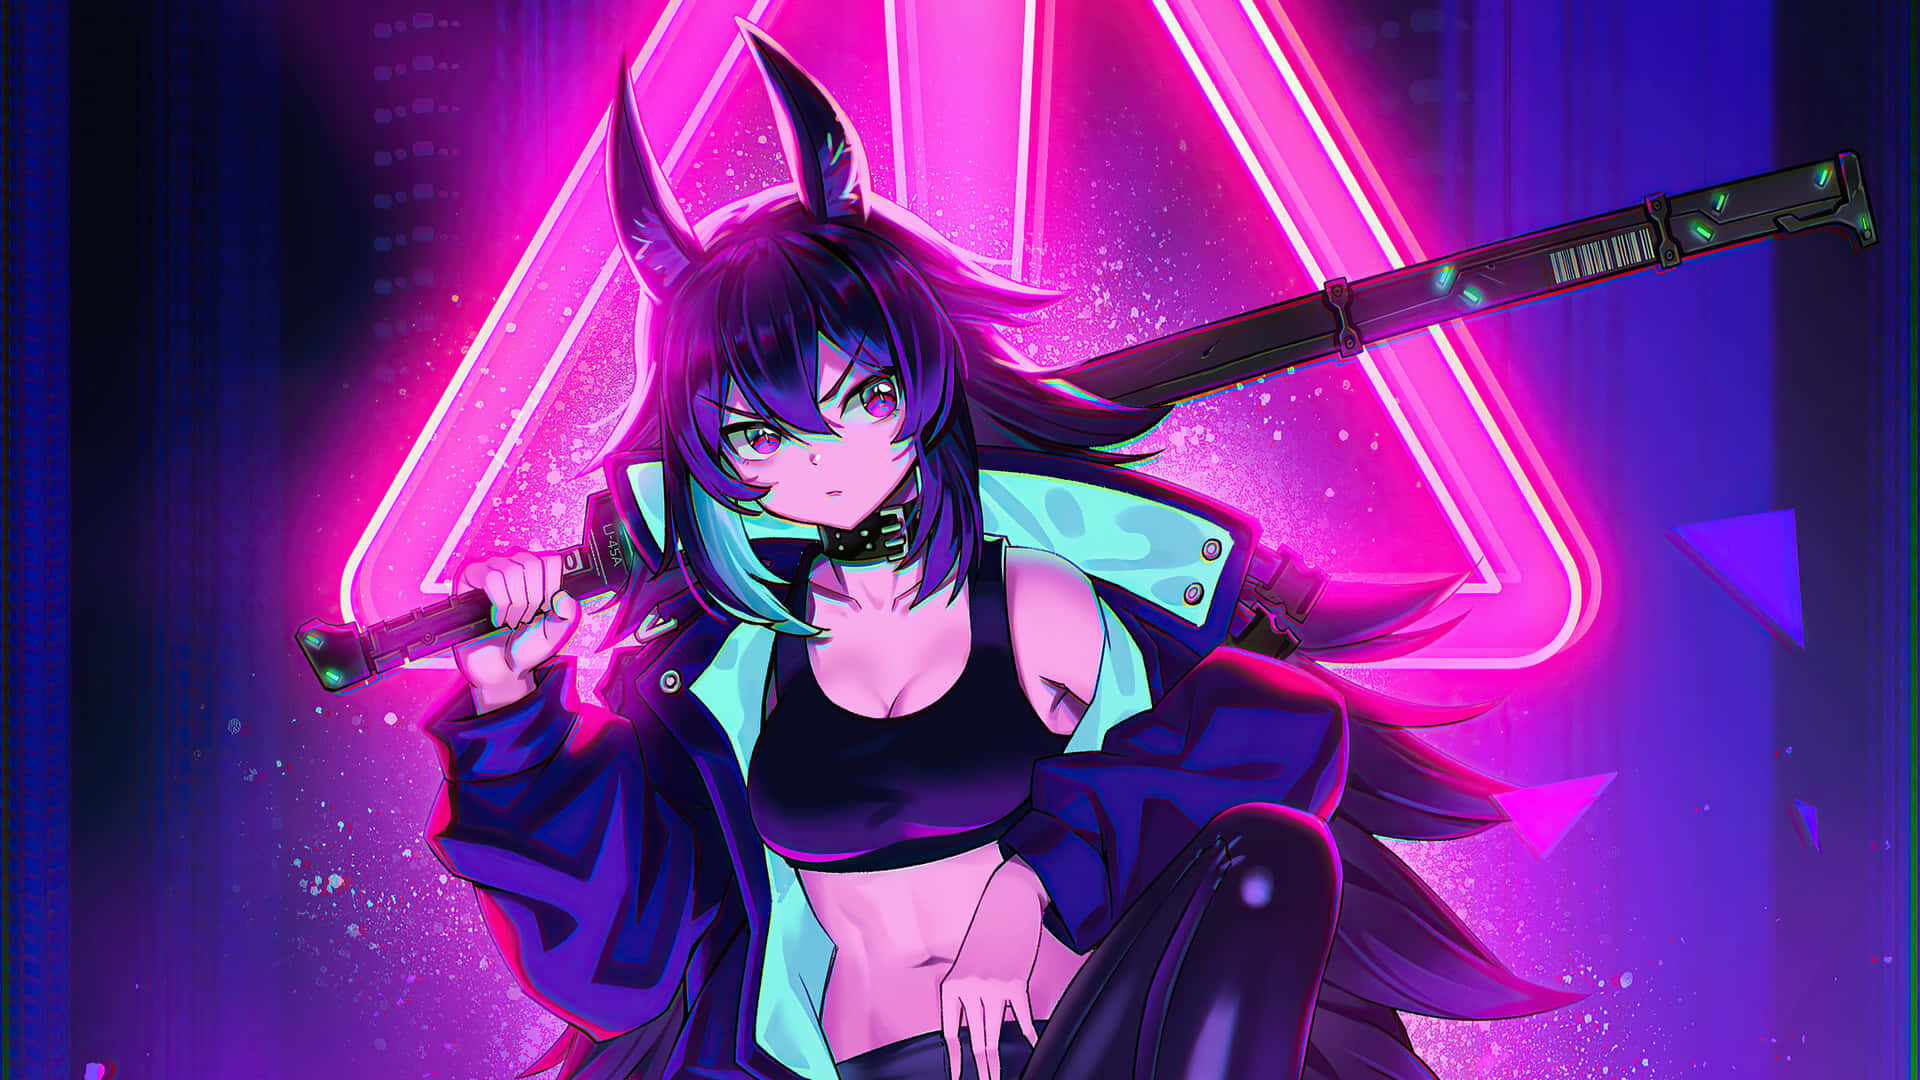 A Girl With A Sword And A Neon Sign